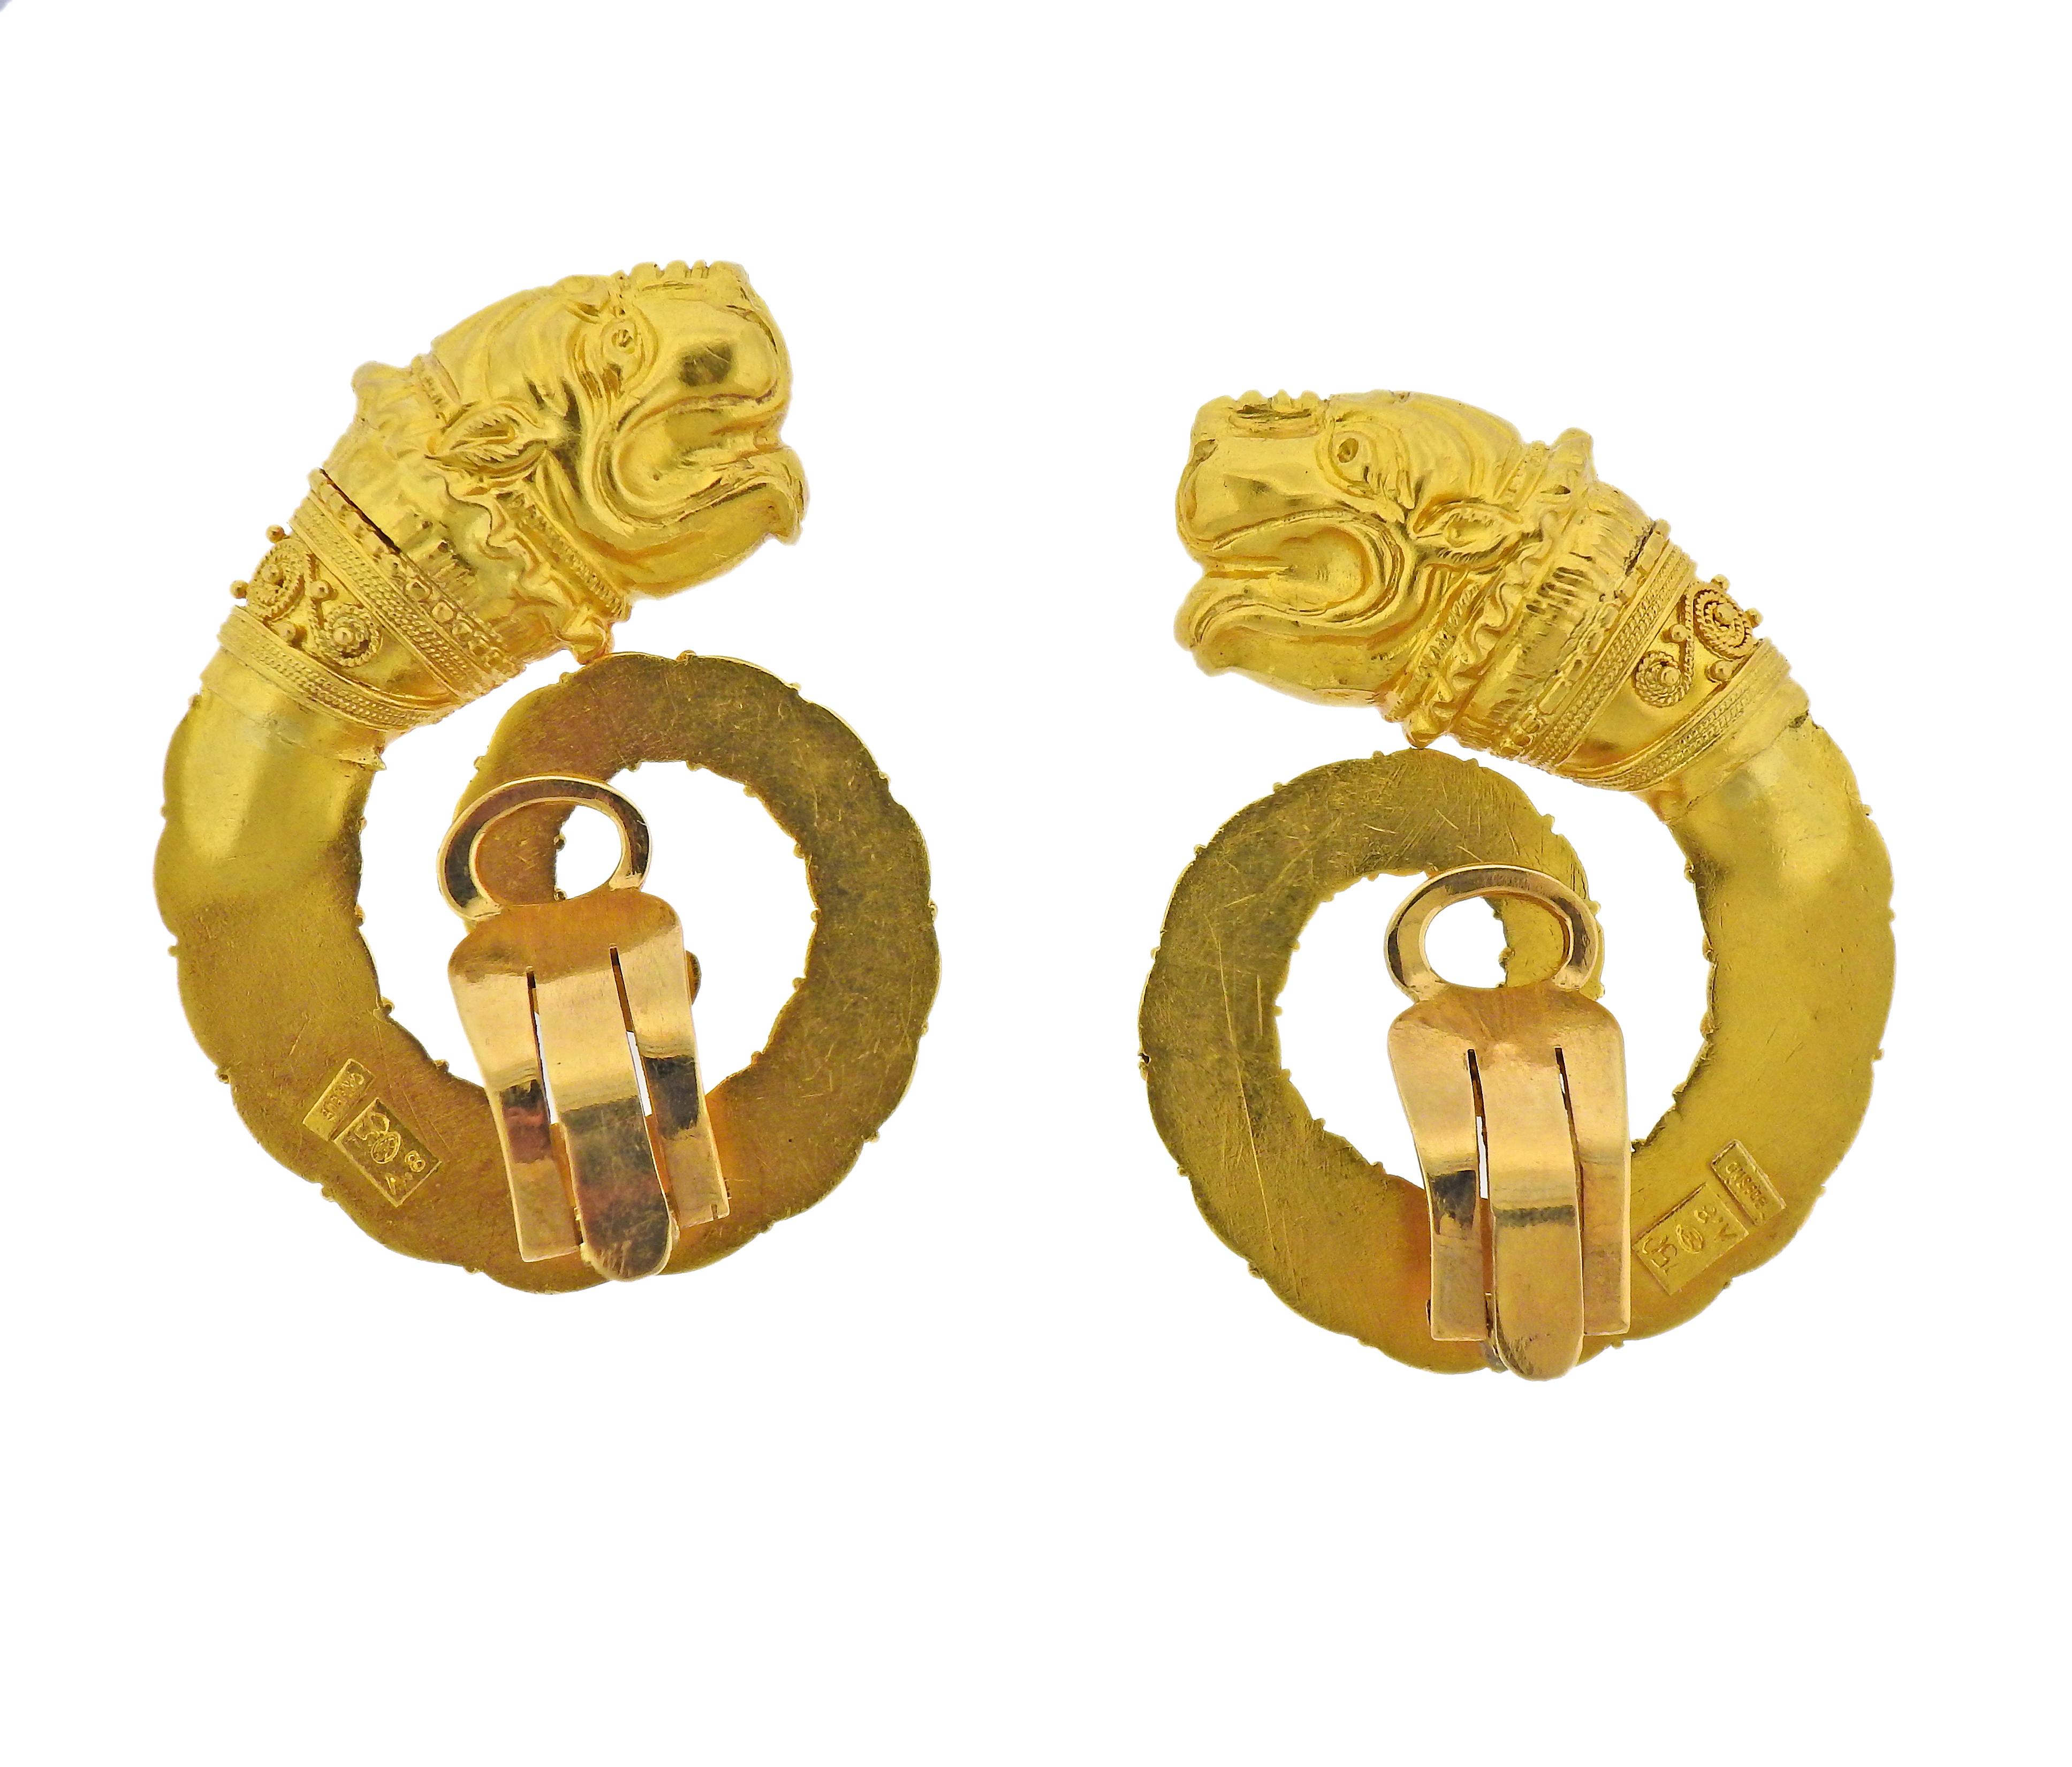 Pair of large Chimera earrings by Ilias Lalaounis, in 18k yellow gold. Earrings are 45mm x 35mm.  Marked:  750, Maker's mark, A.8. Weight - 28.8 grams. 